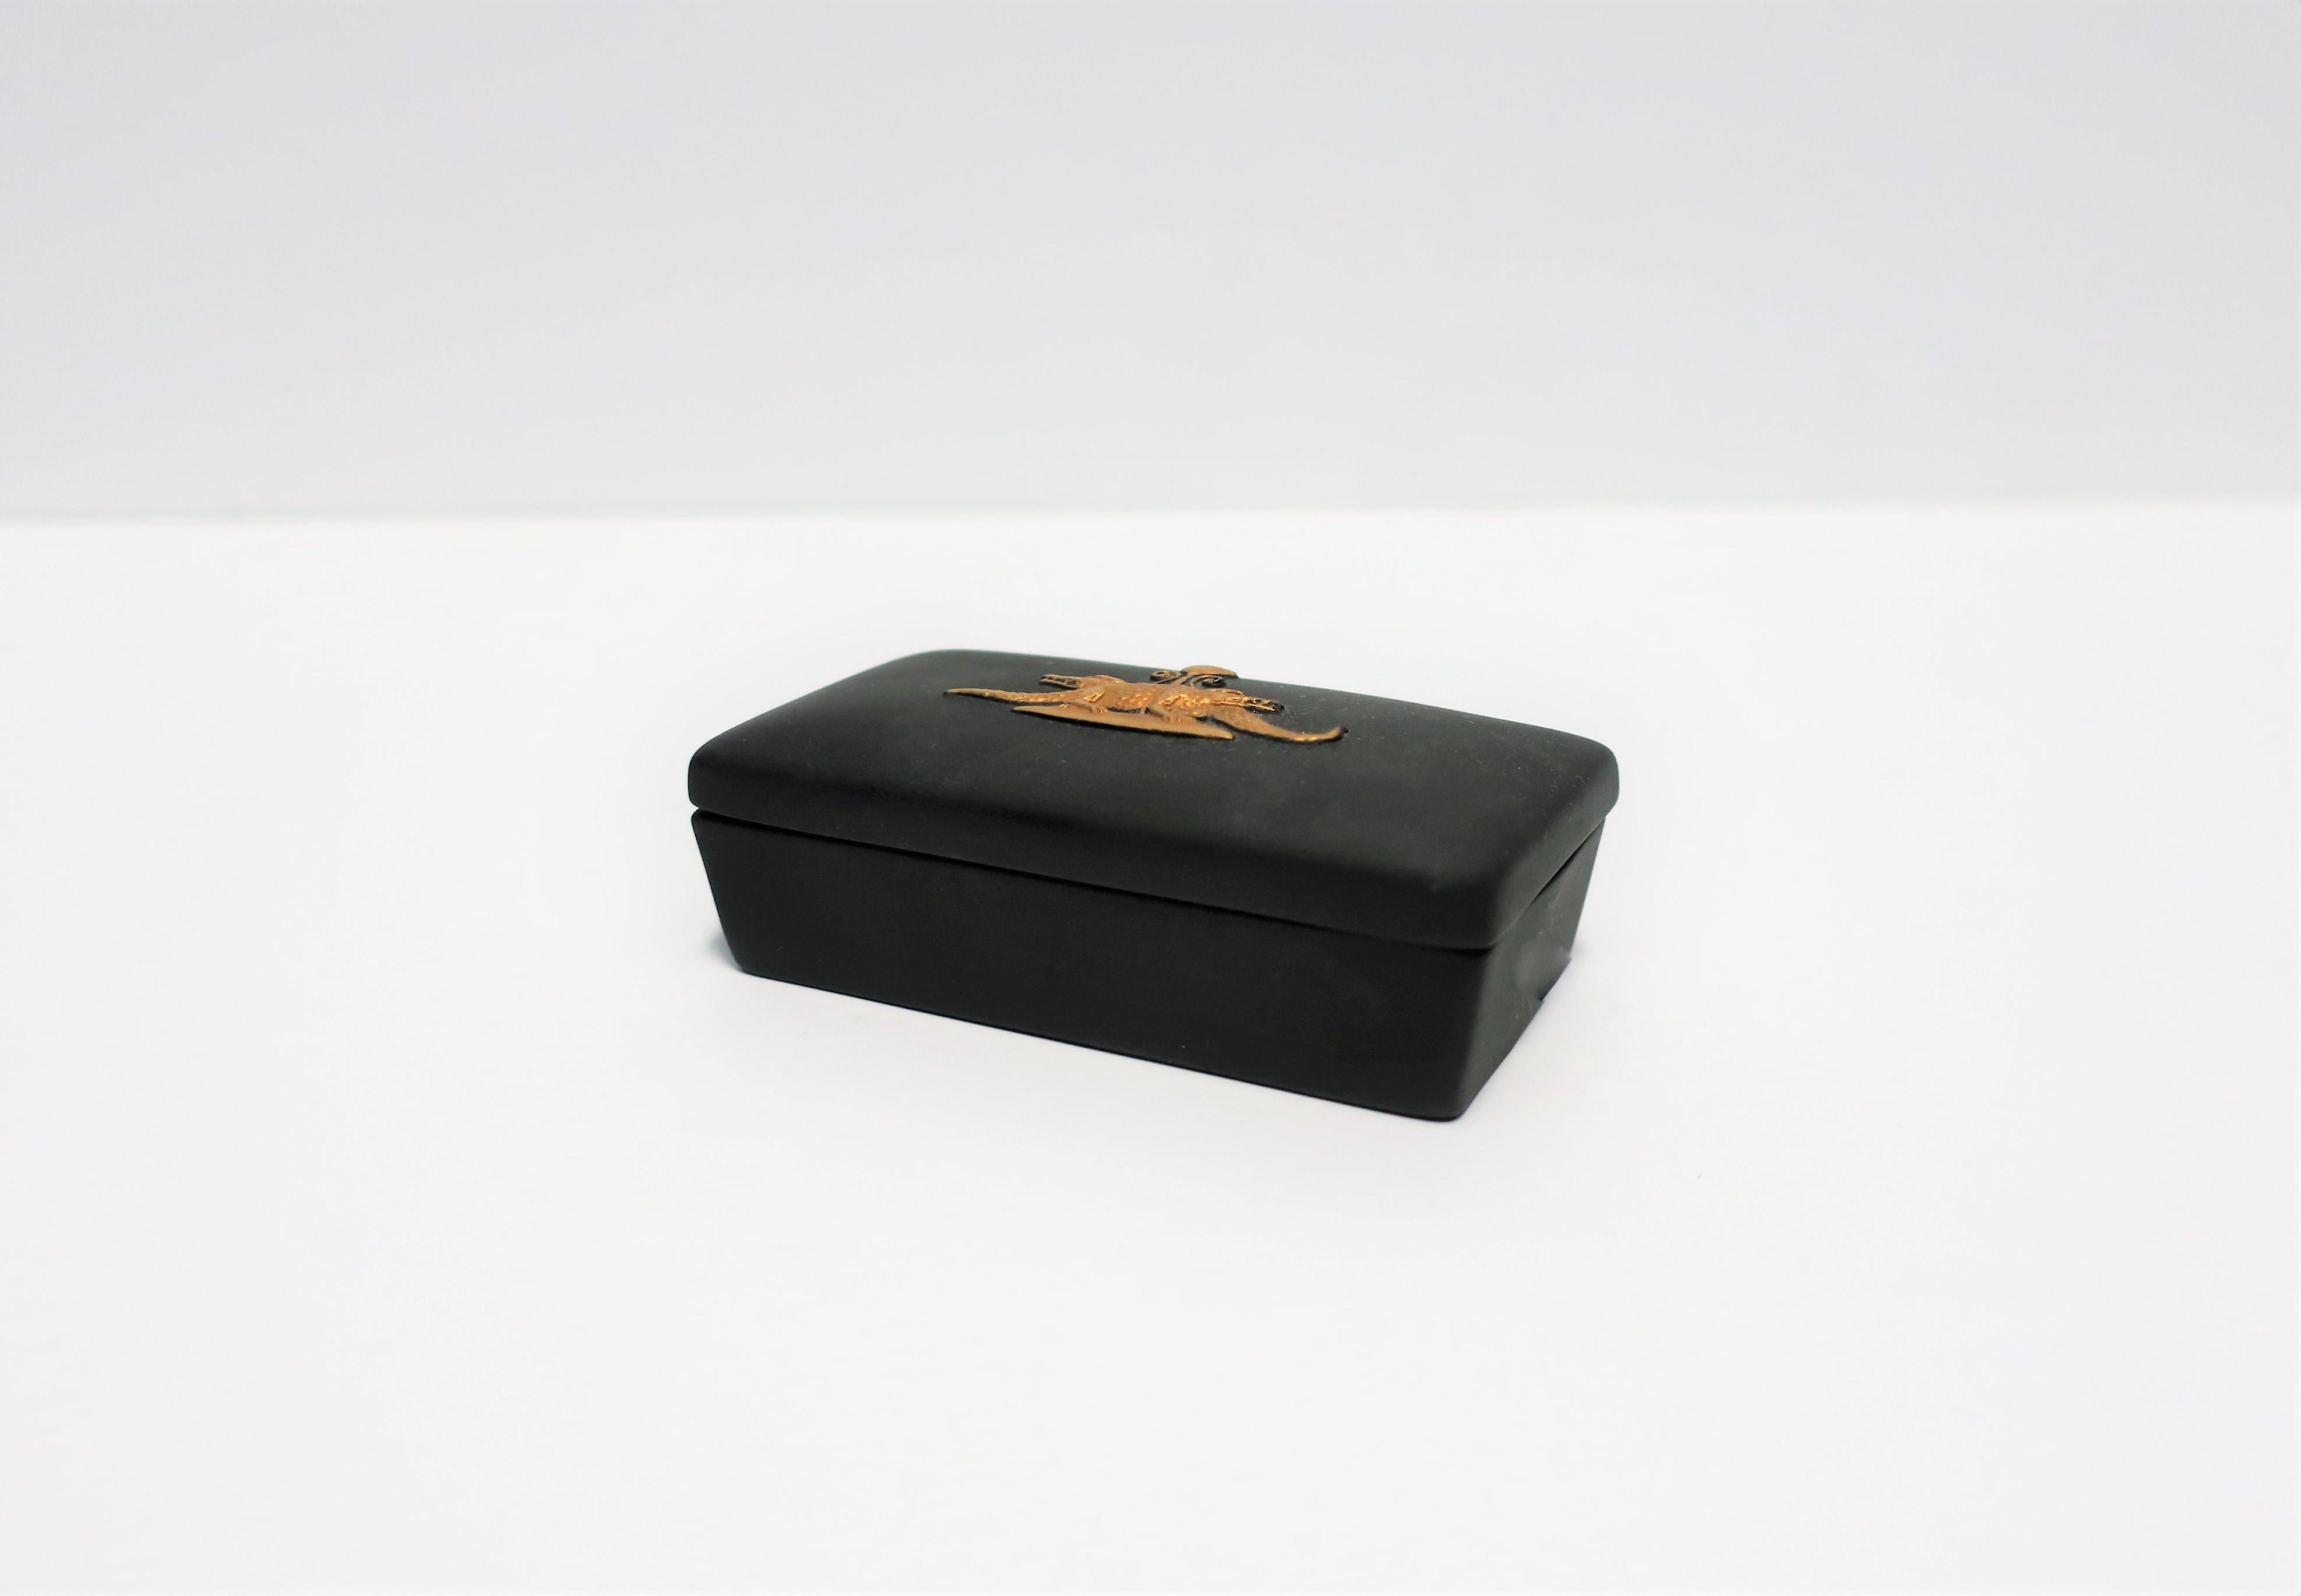 20th Century English Wedgwood Matte Black Basalt and Gold Raised Relief Box